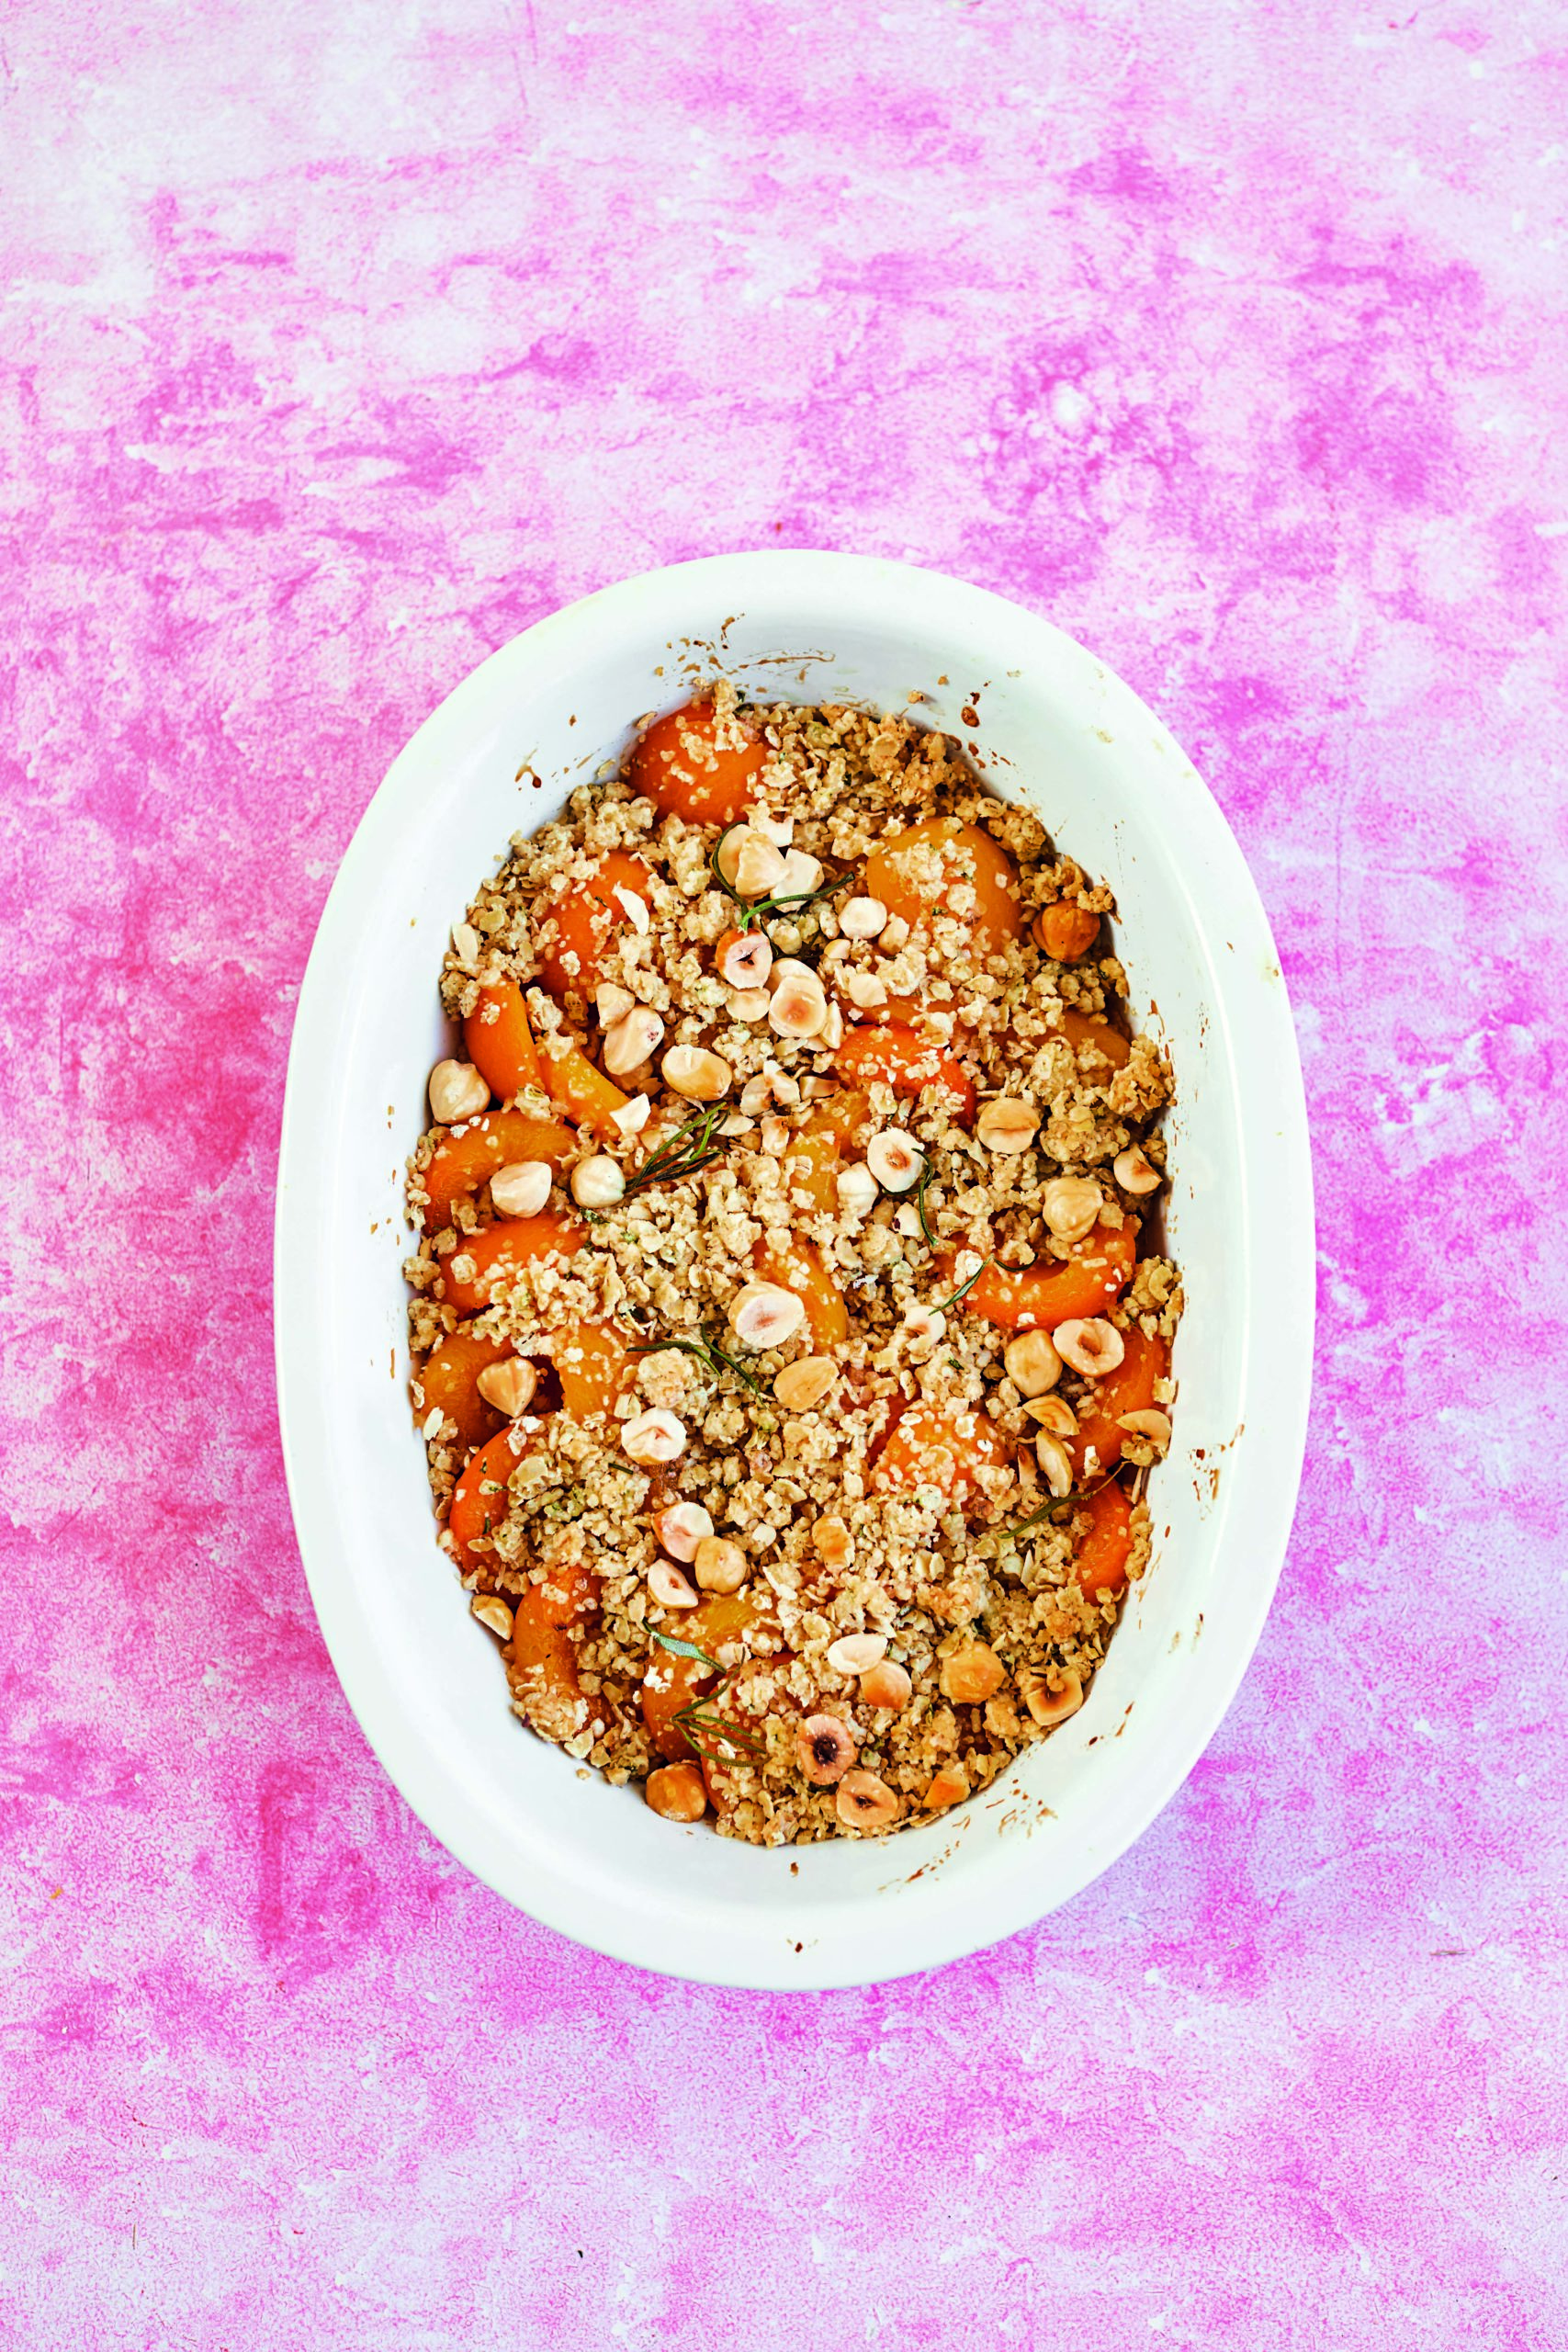 Roasted Apricots With A Rosemary and Hazelnut Crumble